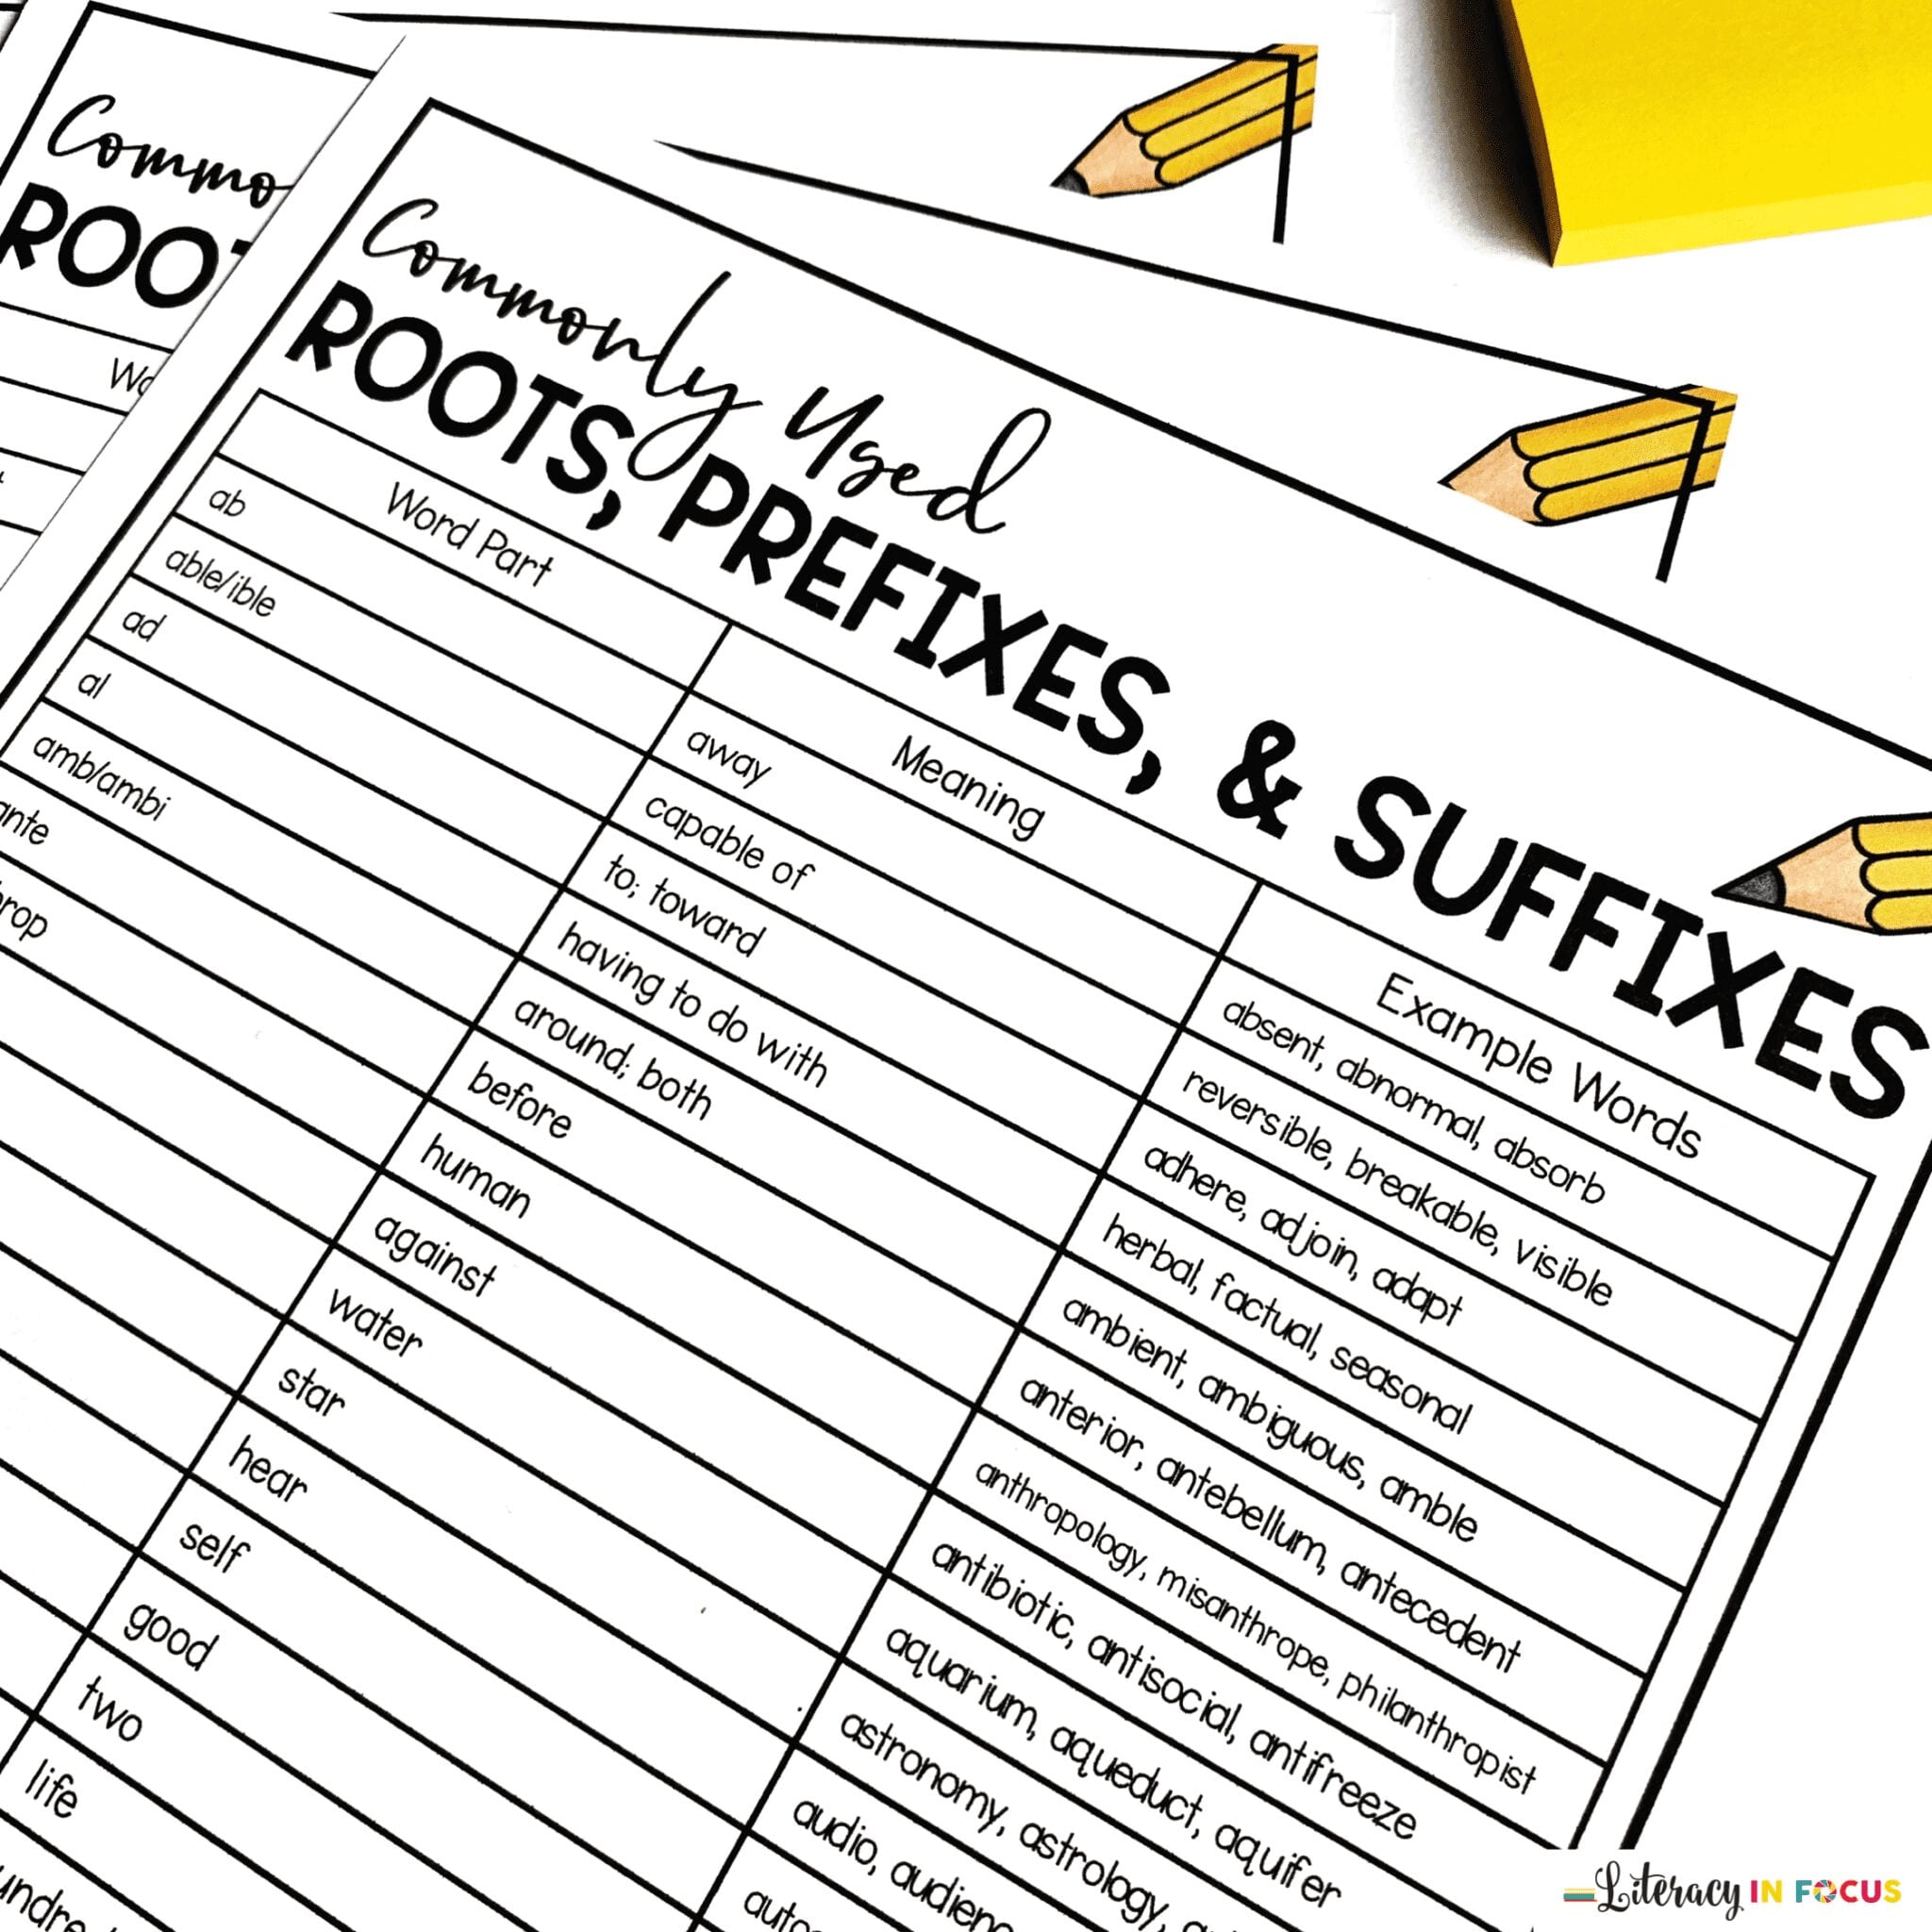 11 Root Words, Prefixes, and Suffixes PDF List  Literacy In Focus Within Root Words Worksheet Pdf